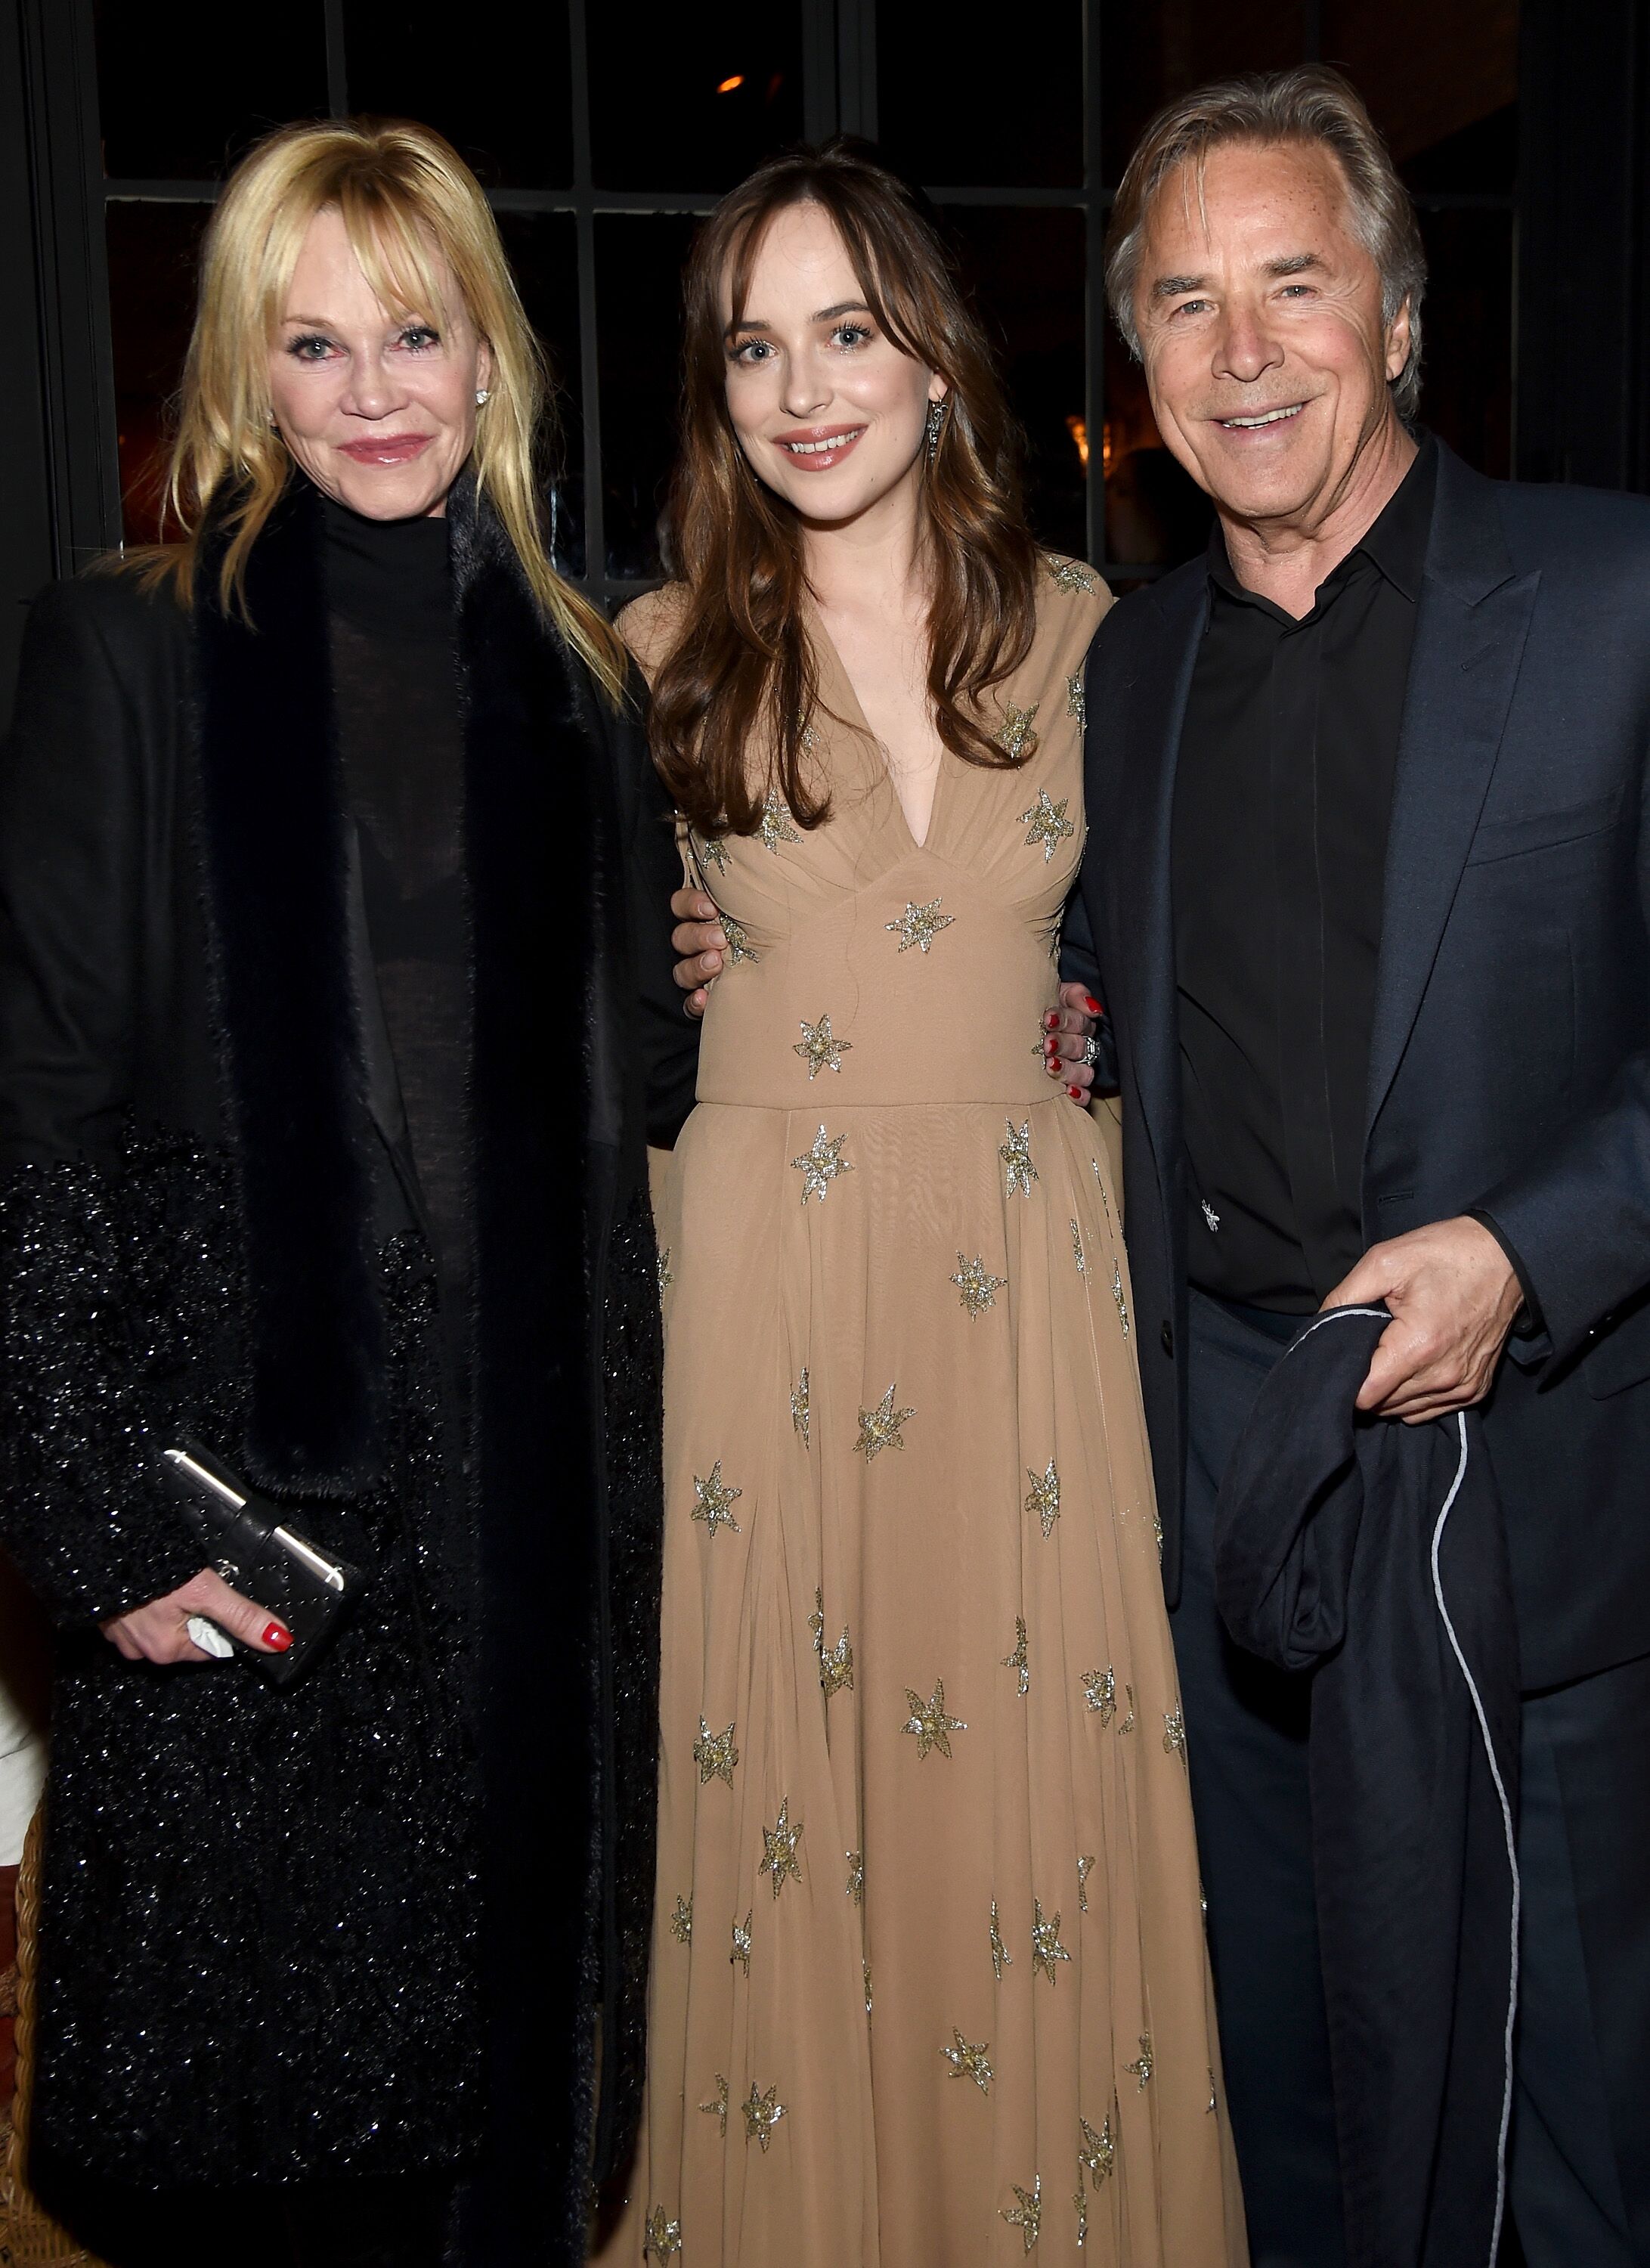 : Melanie Griffith, Dakota Johnson, and Don Johnson attend the after party for the New York premiere of "How To Be Single" in 2016 | Source: Getty Images